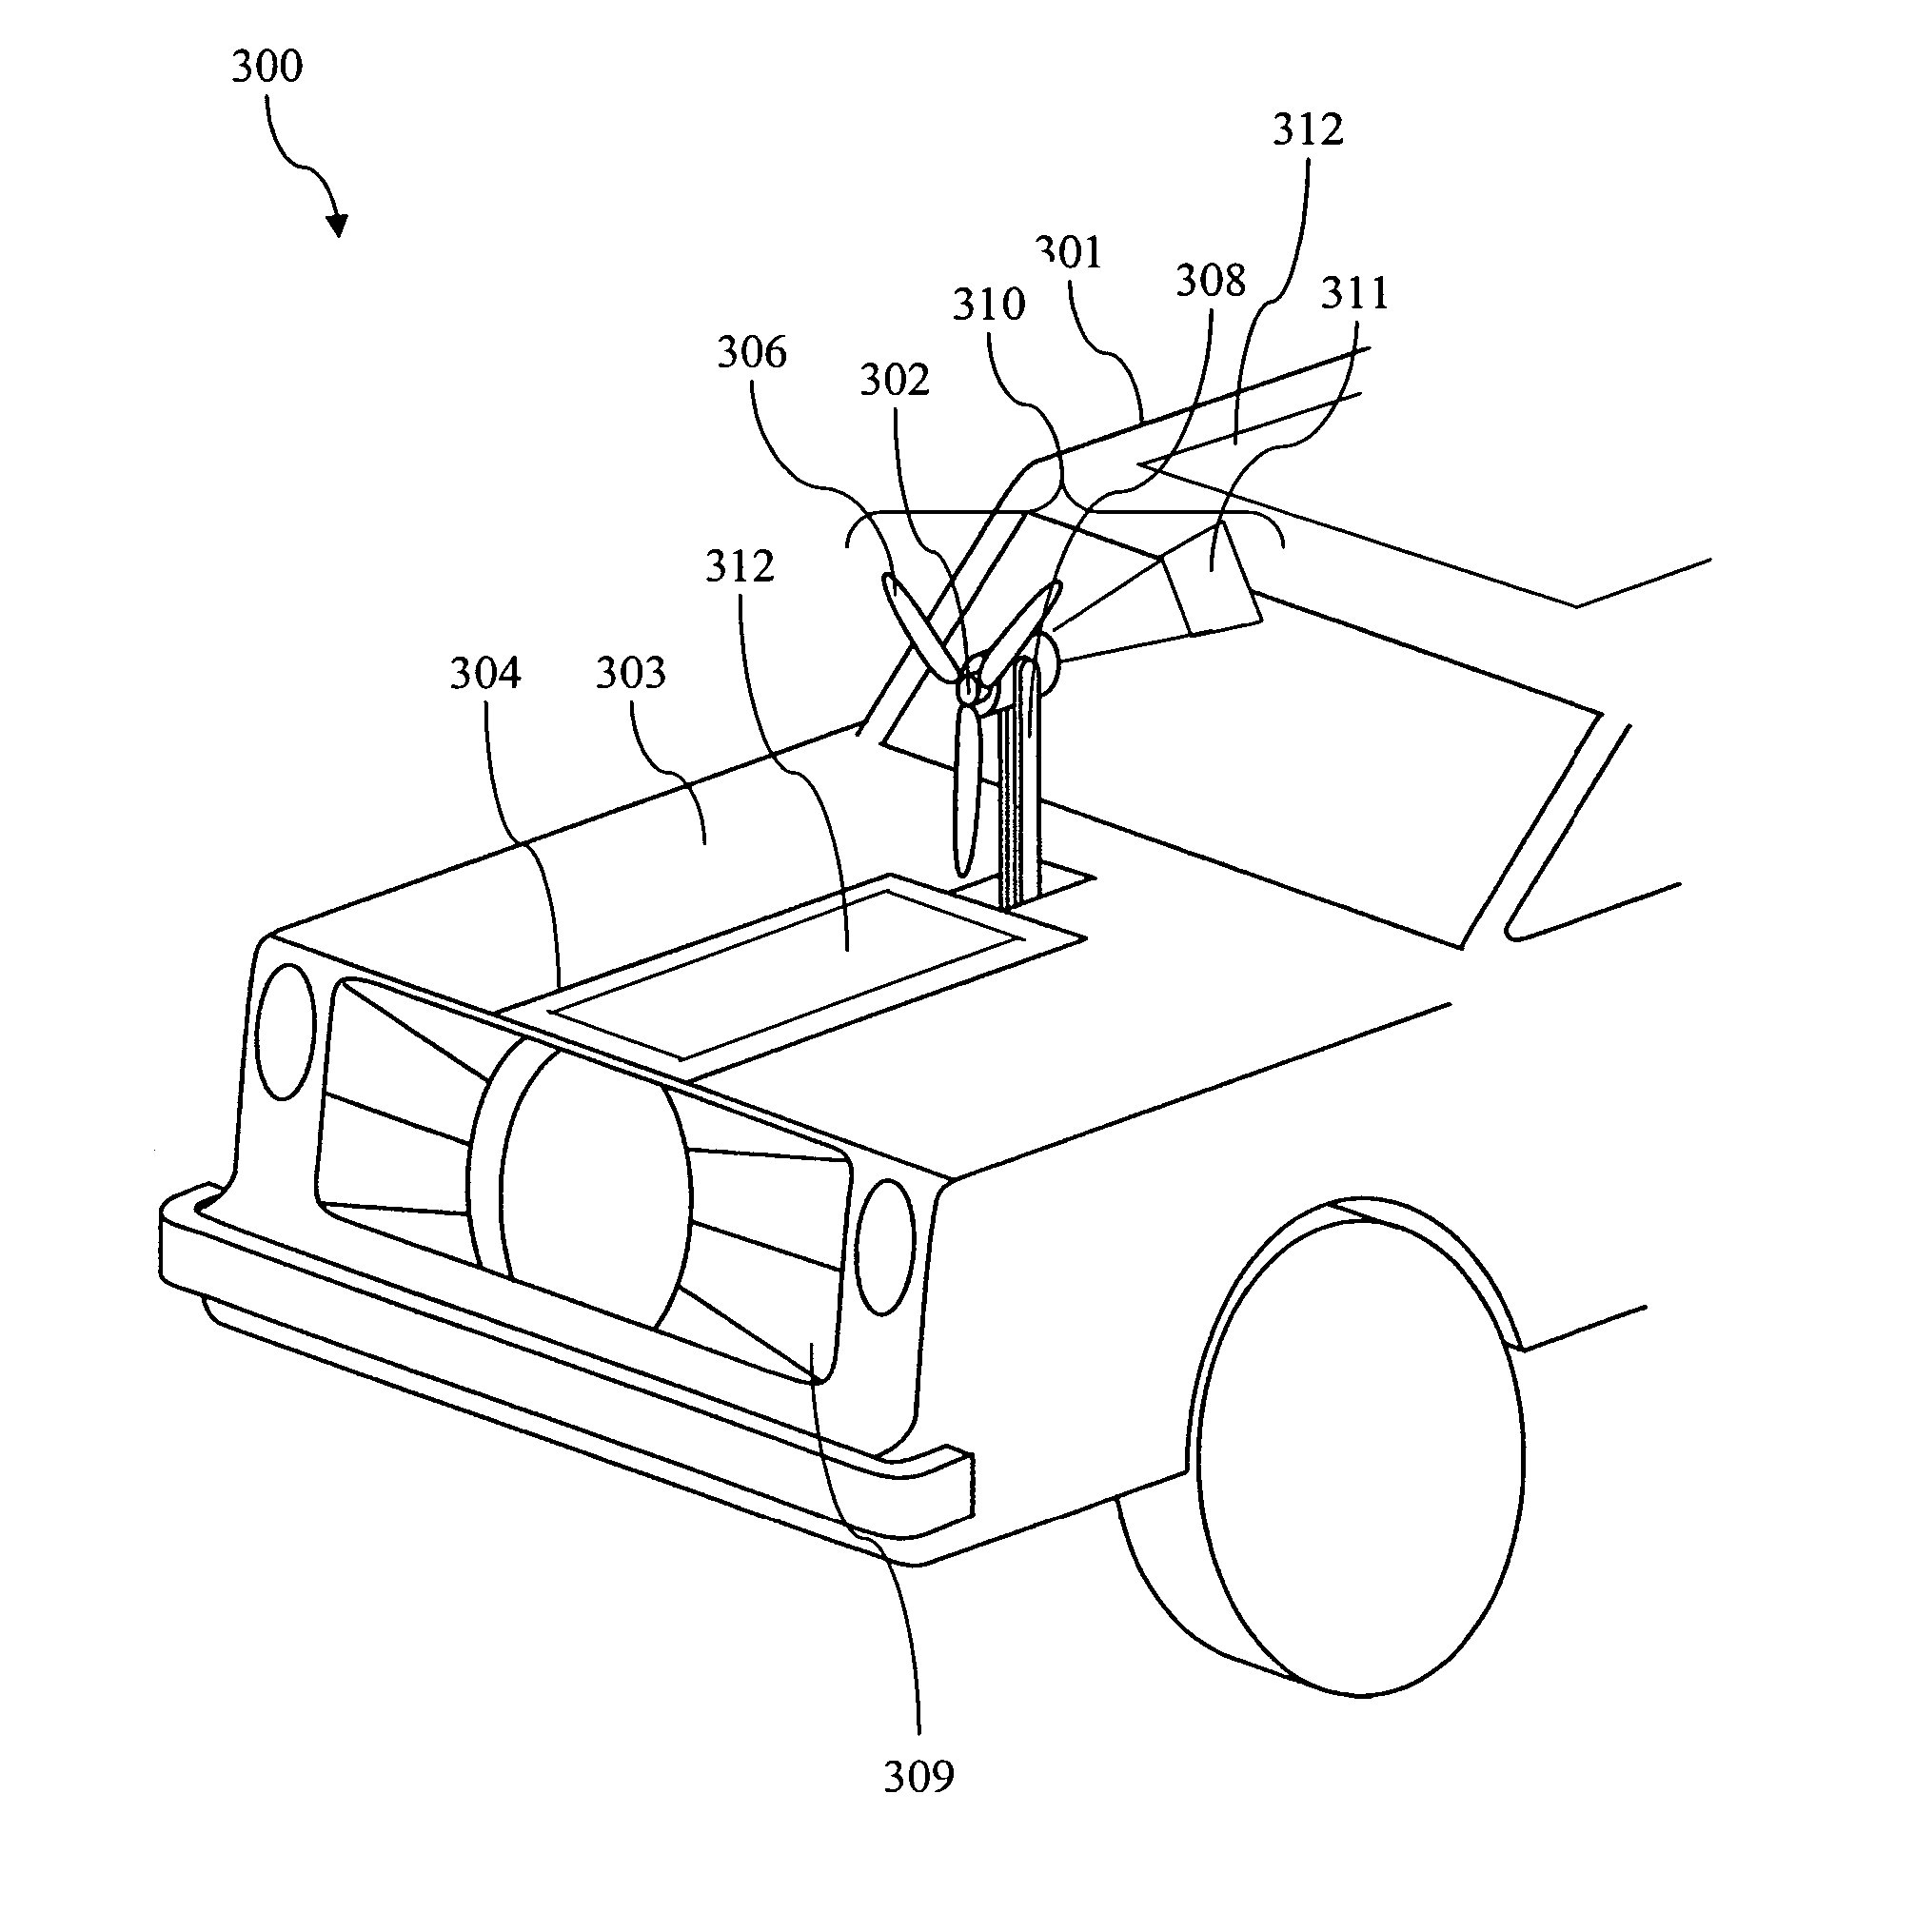 Power system for electric and hybrid vehicles